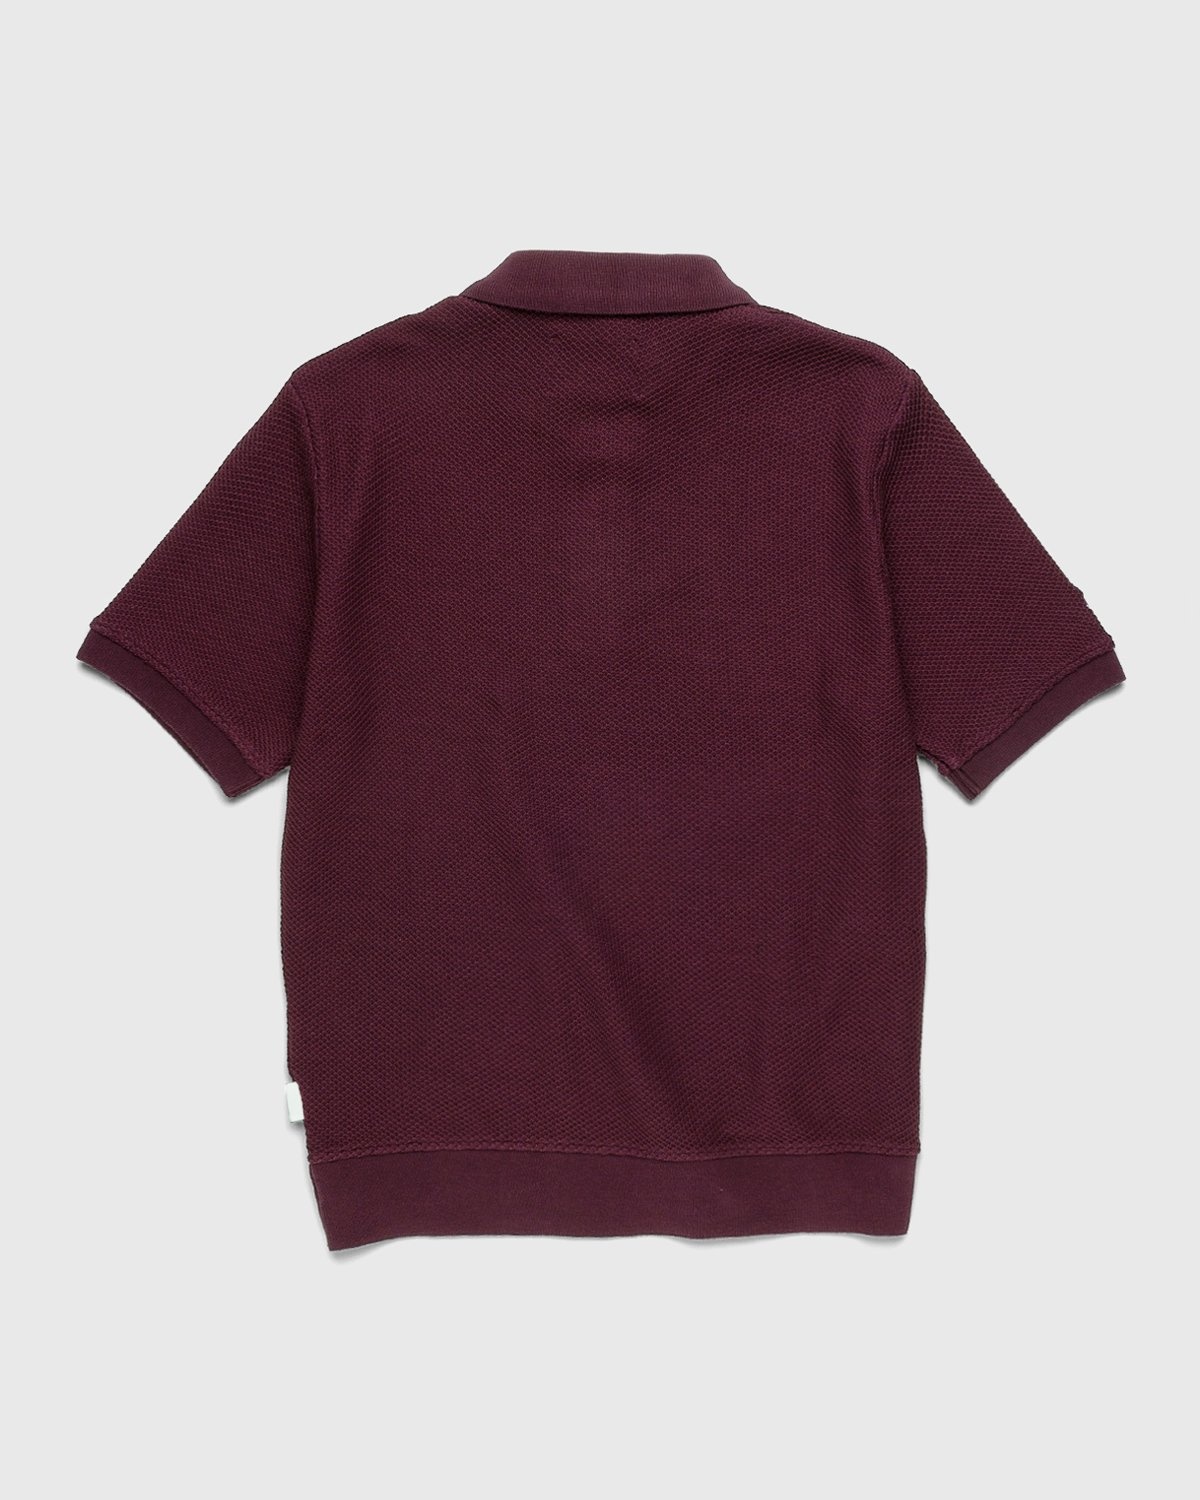 Highsnobiety – Knit Short-Sleeve Polo Bordeaux - Polos - Brown - Image 2